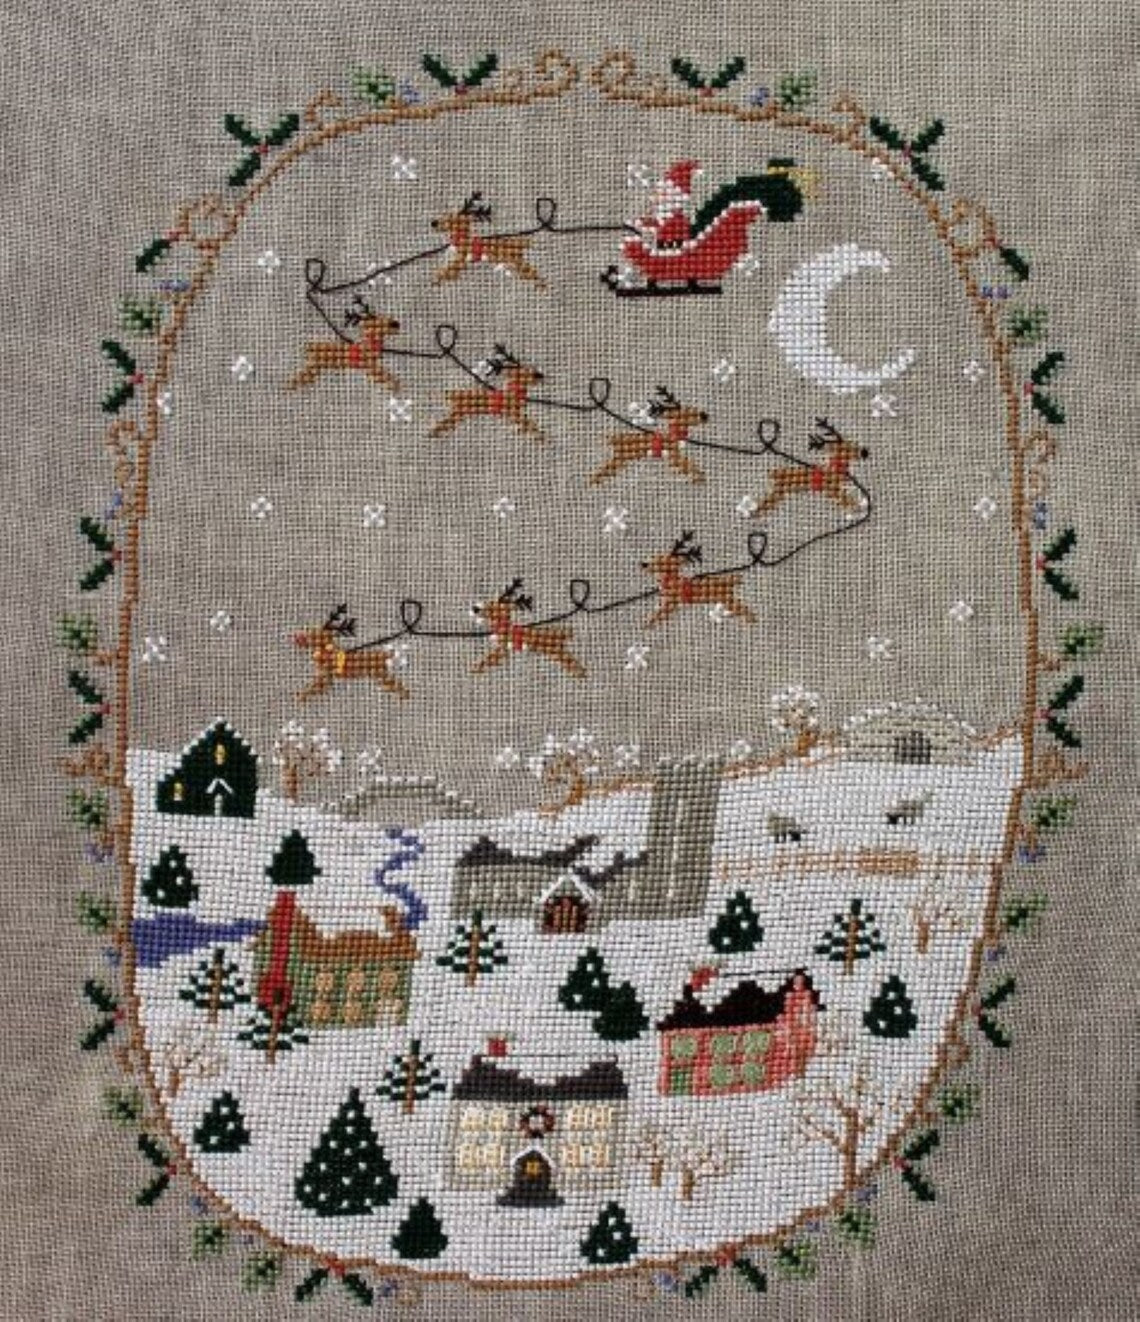 Cosford Rise Stitchery - Happy Christmas to All - Booklet Chart with Roxy Floss Co Conversion